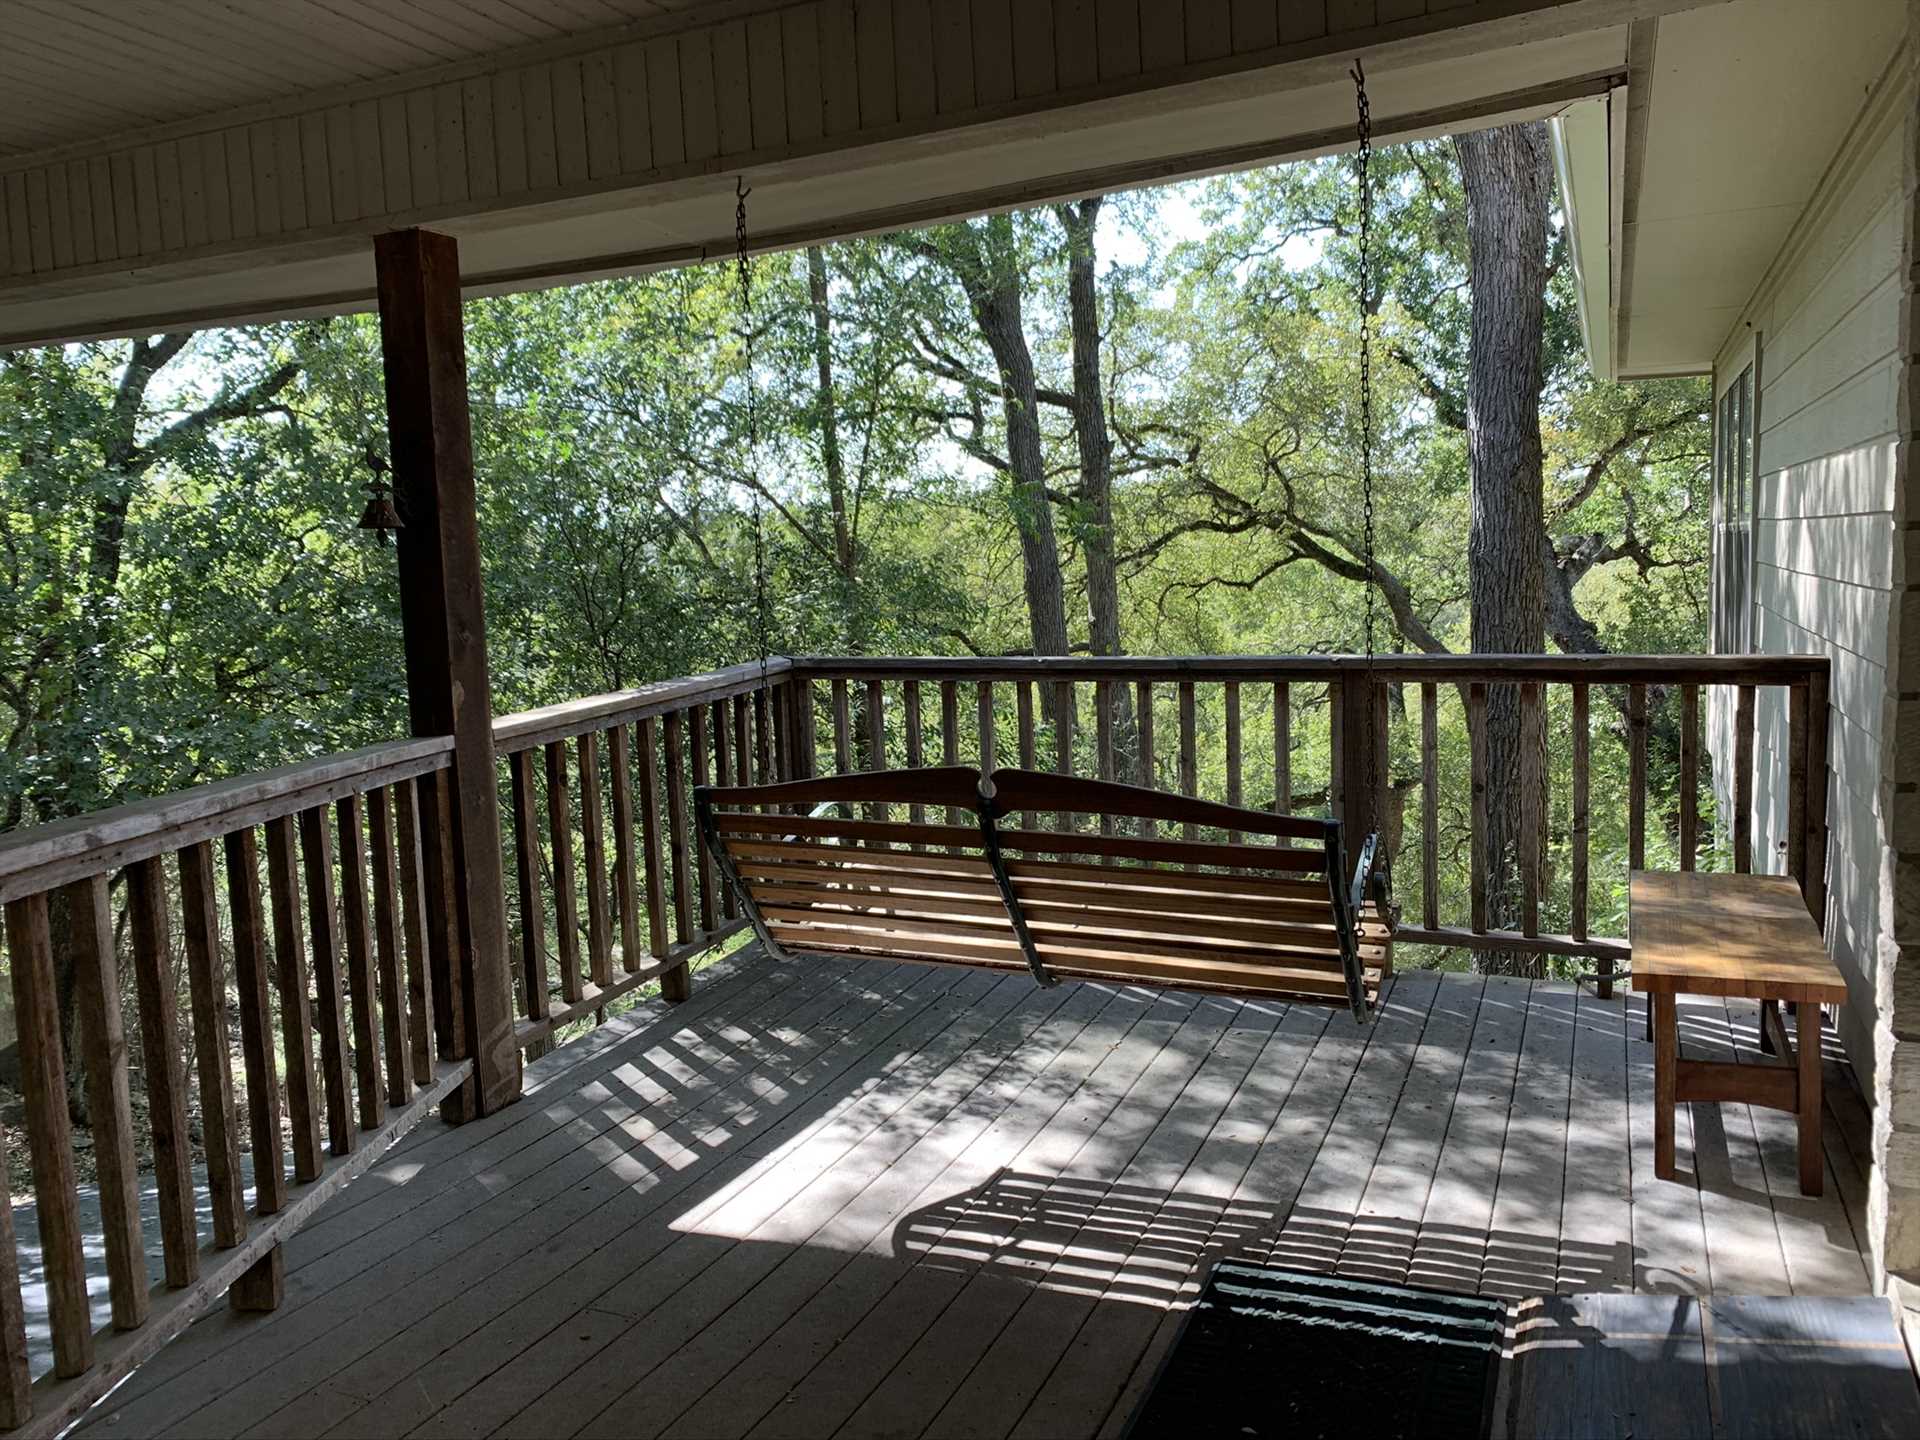                                                 The side patio has a porch swing that provides a more intimate relaxation space.